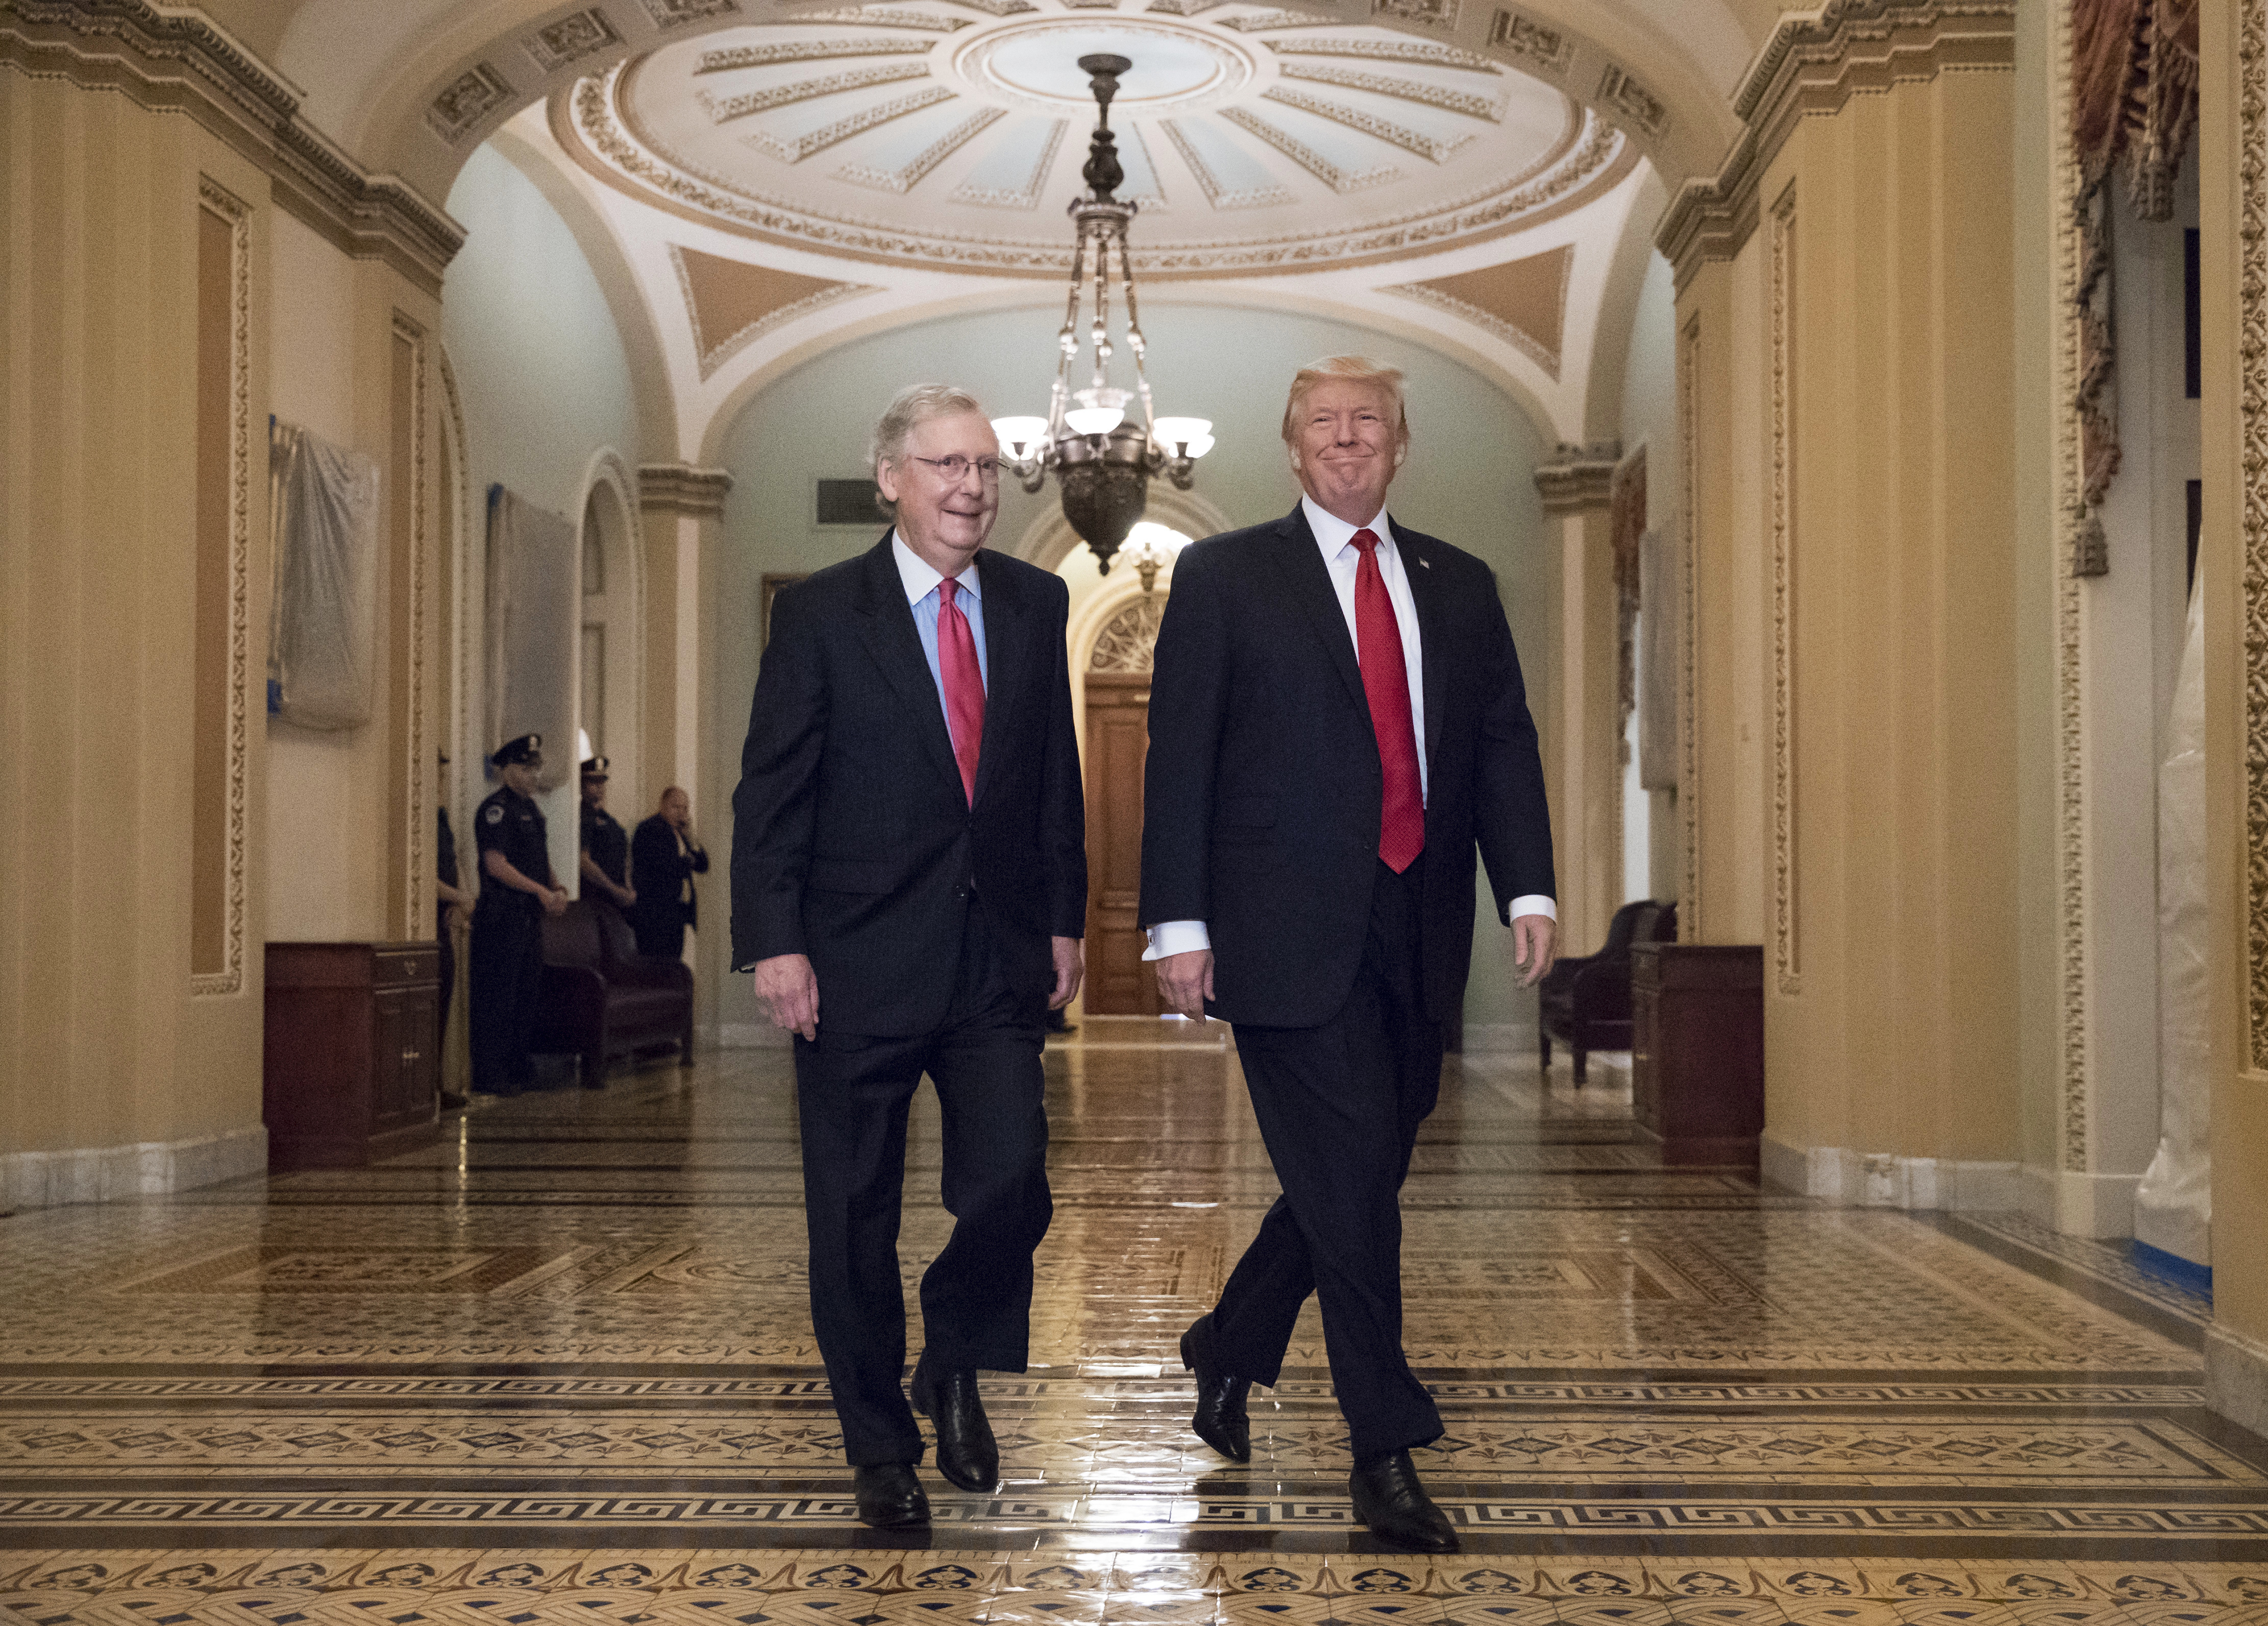 Senate Majority Leader Mitch McConnell and President Trump.